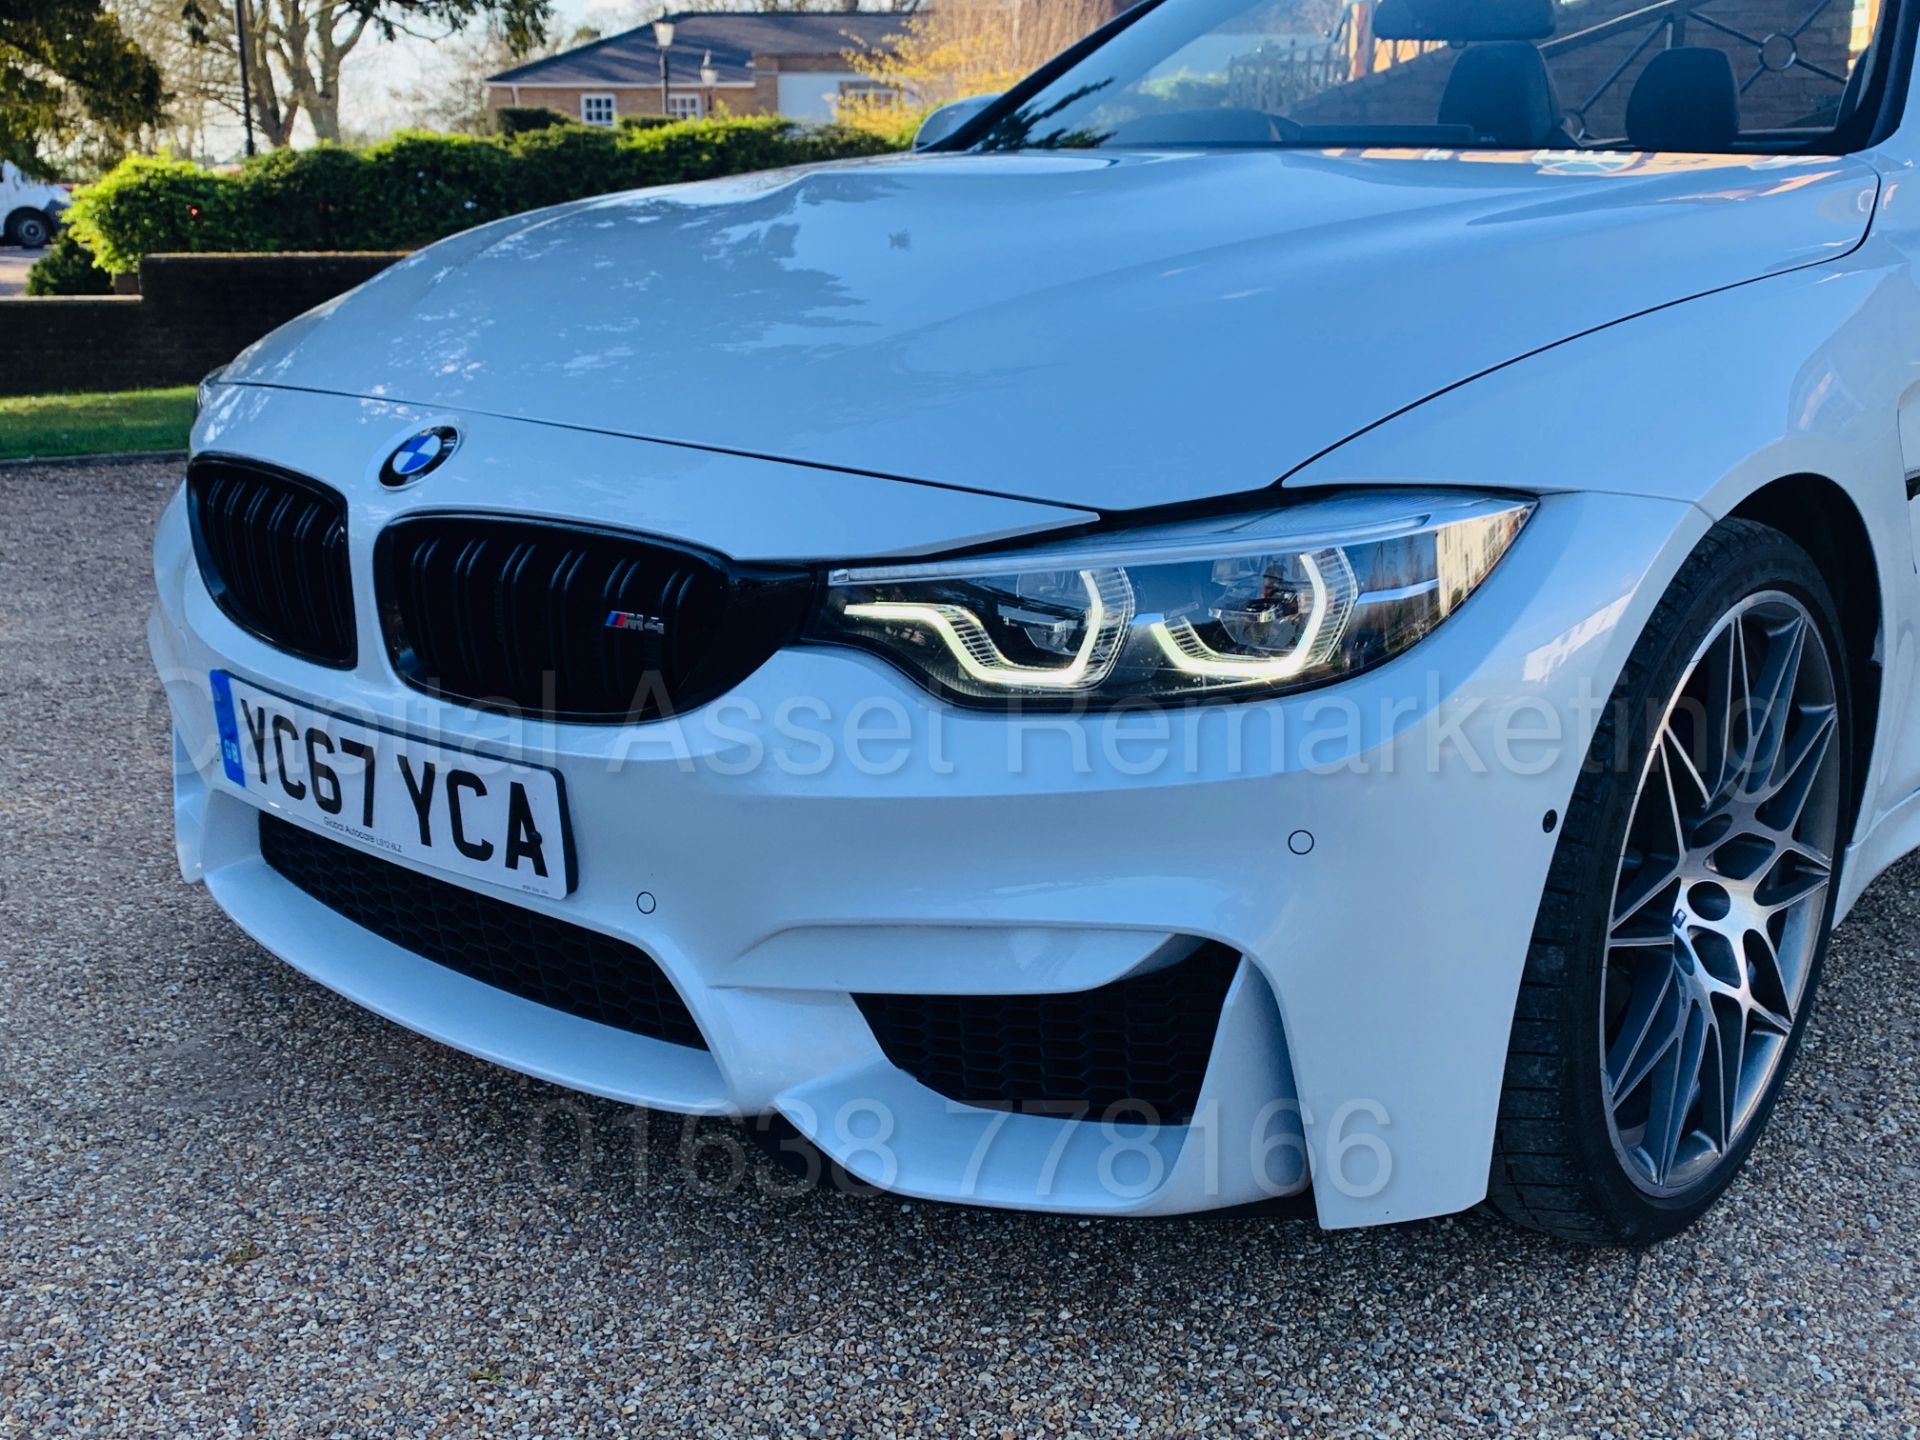 ON SALE BMW M4 CONVERTIBLE *COMPETITION PACKAGE* (2018 MODEL) '431 BHP - M DCT AUTO' WOW!!!!! - Image 28 of 89